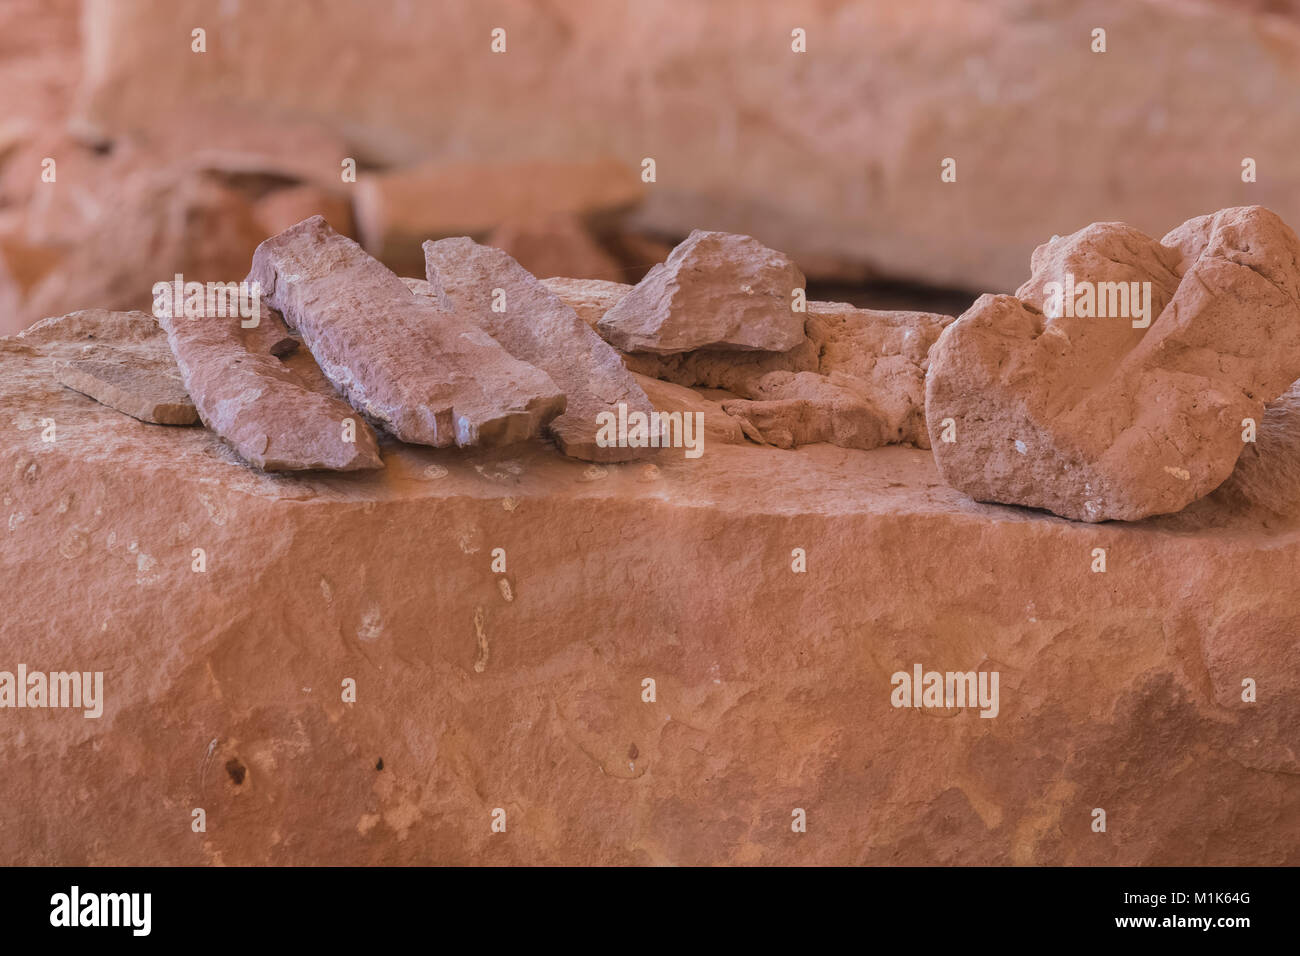 Ancestral Puebloan stone tools at a site once inhabited within Salt Creek Canyon in The Needles District of Canyonlands National Park, Utah, USA Stock Photo